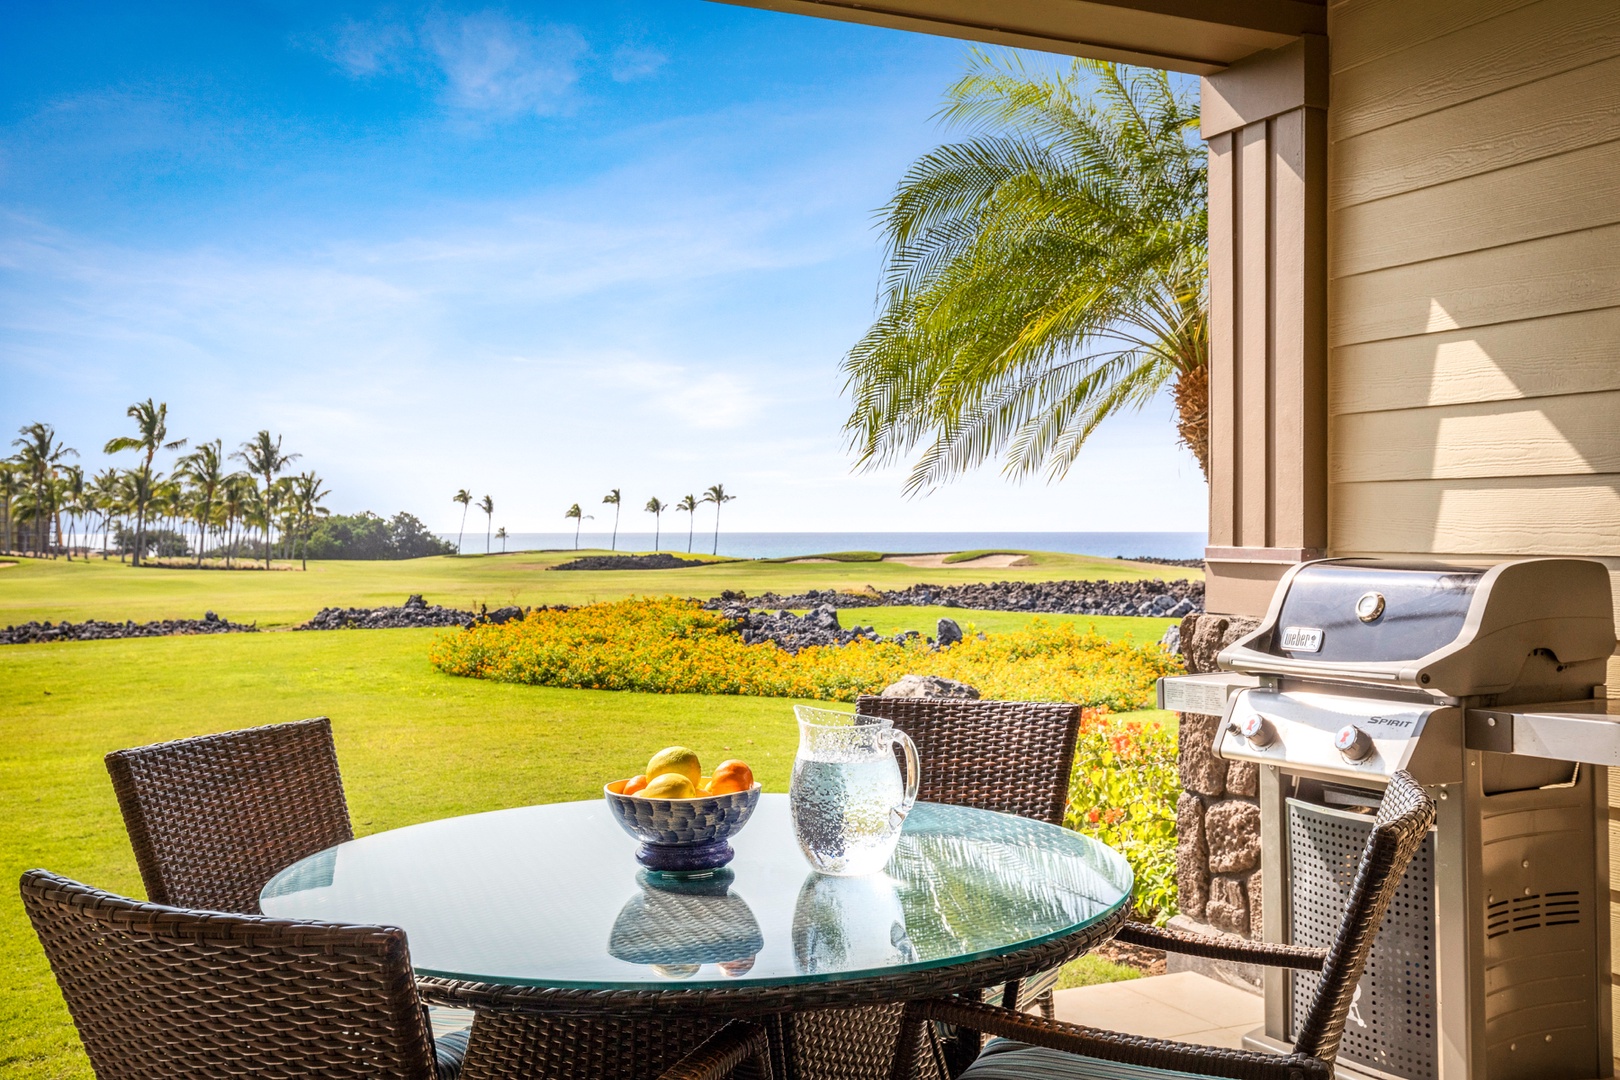 Waikoloa Vacation Rentals, 2BD Hali'i Kai (12C) at Waikoloa Resort - Ocean and rolling golf course views from your outdoor dining area equipped with a BBQ grill.